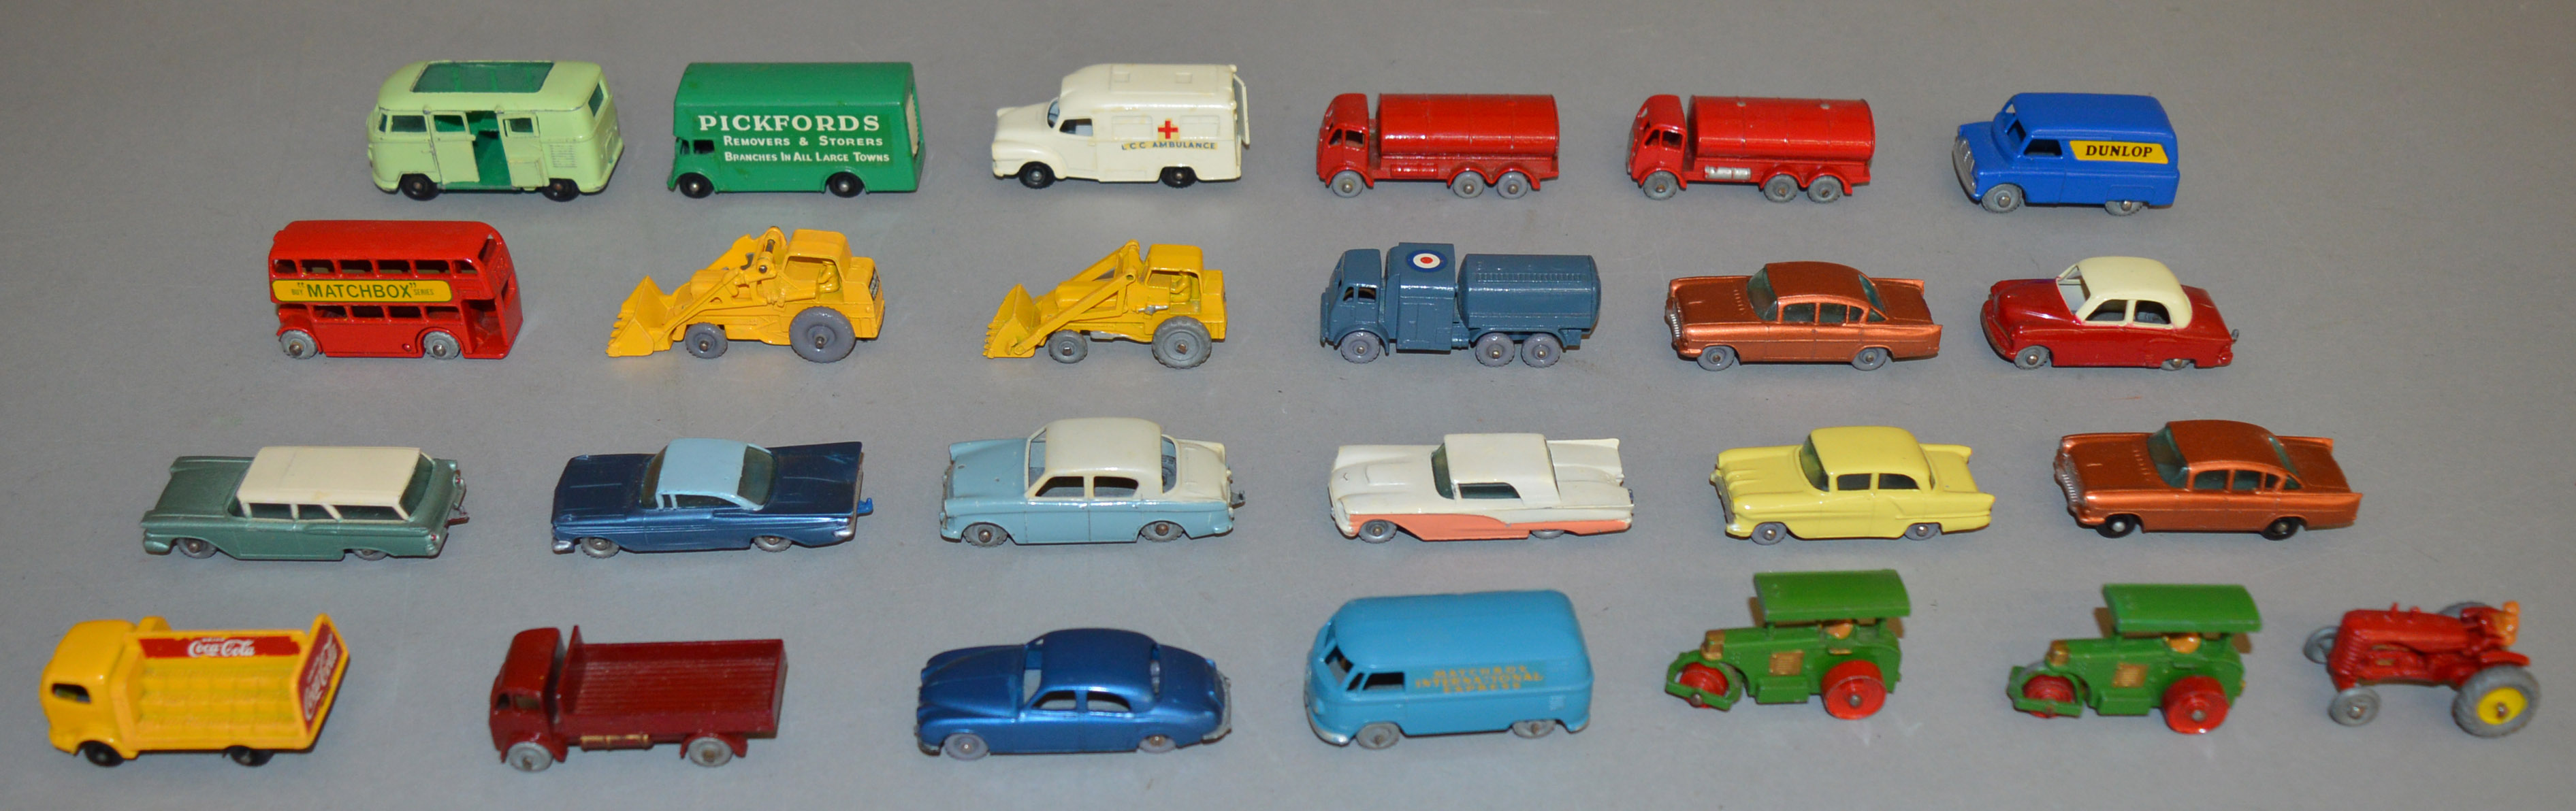 25 unboxed Regular Wheel models from the Matchbox 1-75 series including two versions of the 11b Esso